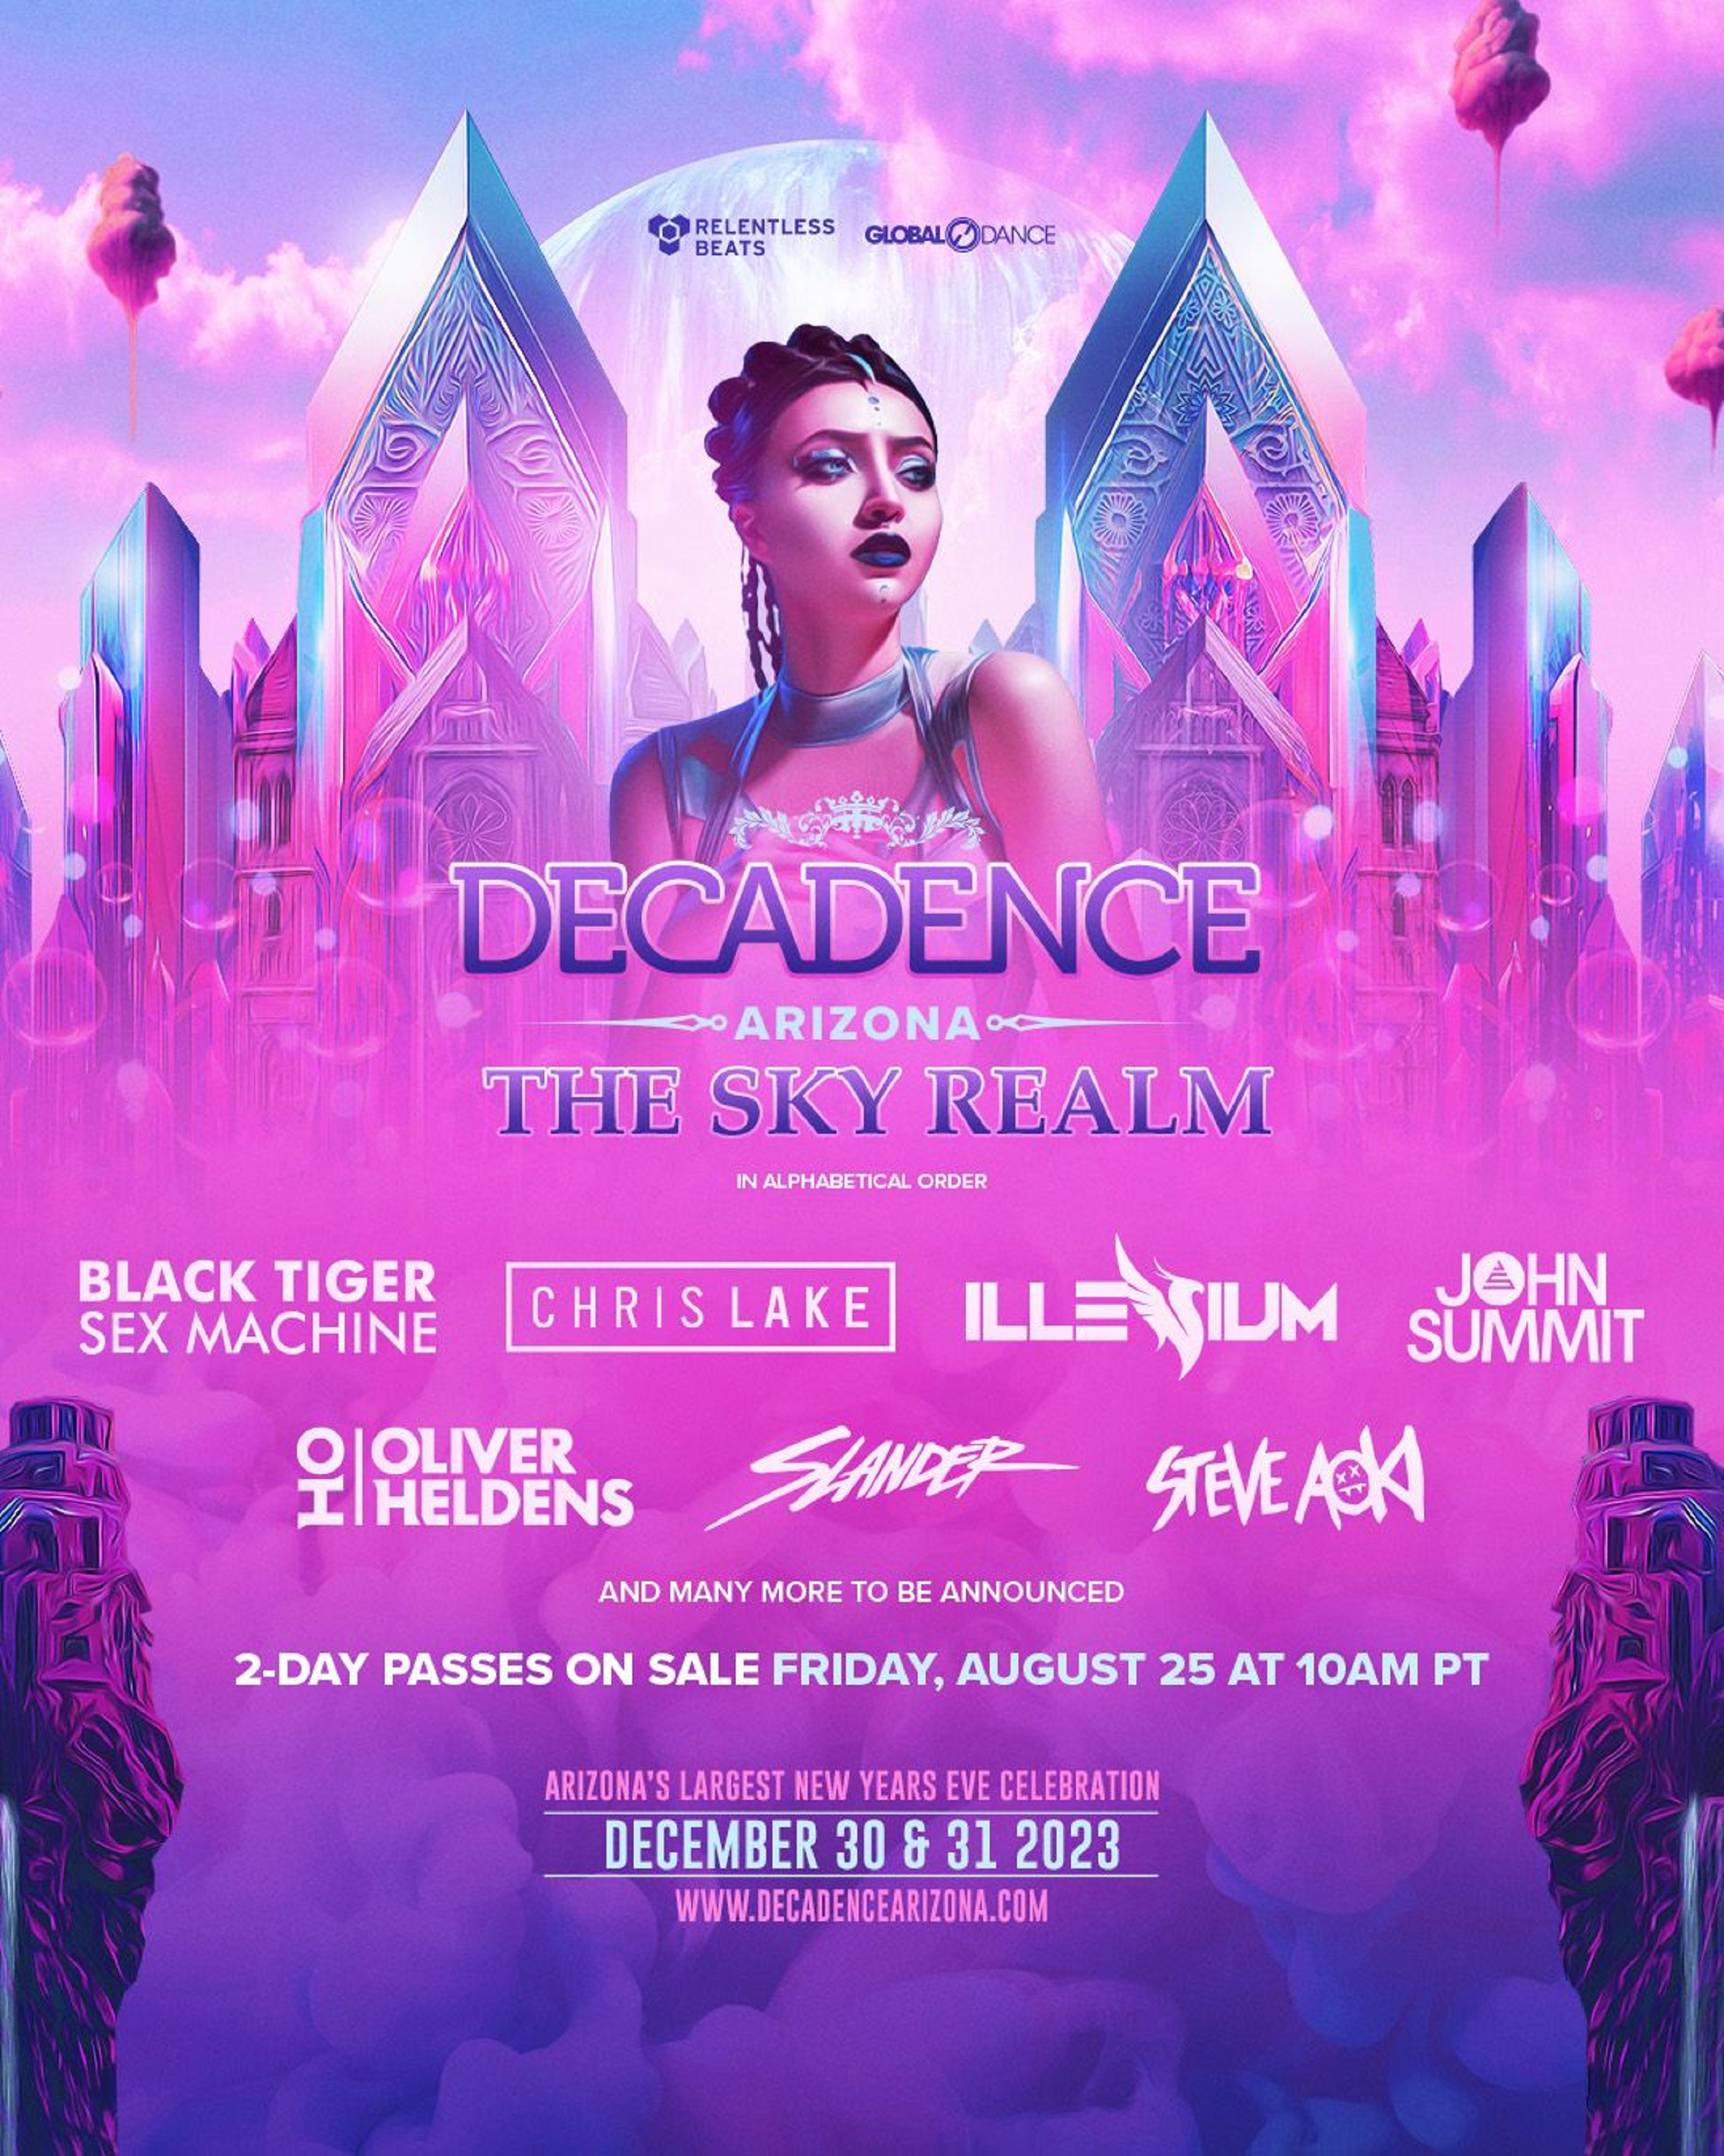 RELENTLESS BEATS PUSHES THE LIMIT WITH DECADENCE ARIZONA: THE SKY REALM ...